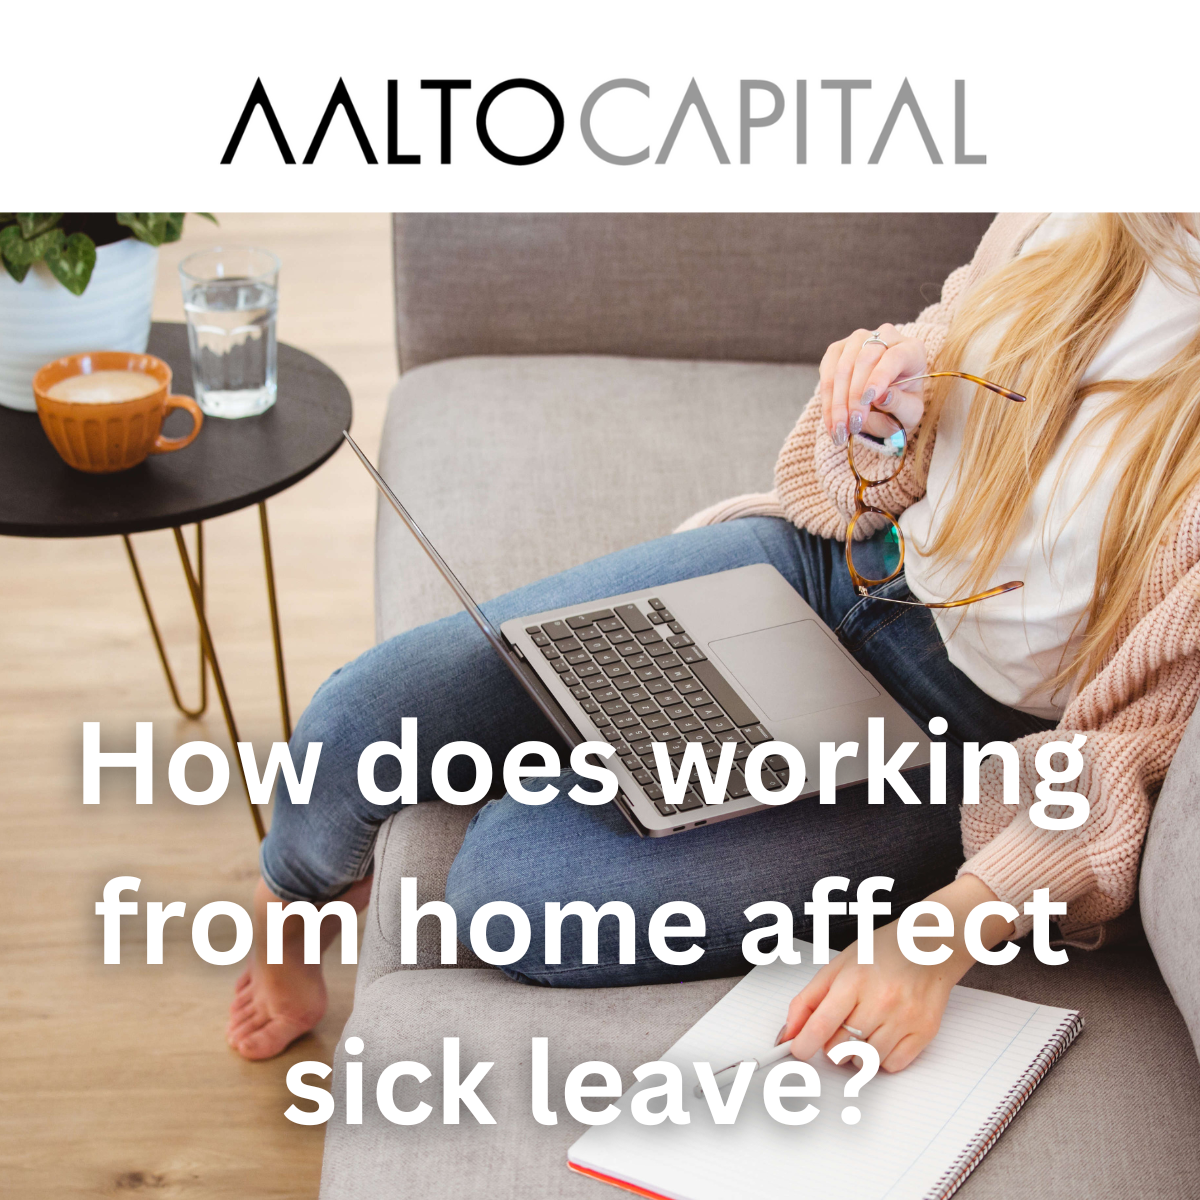 How does working from home affect sick leave?